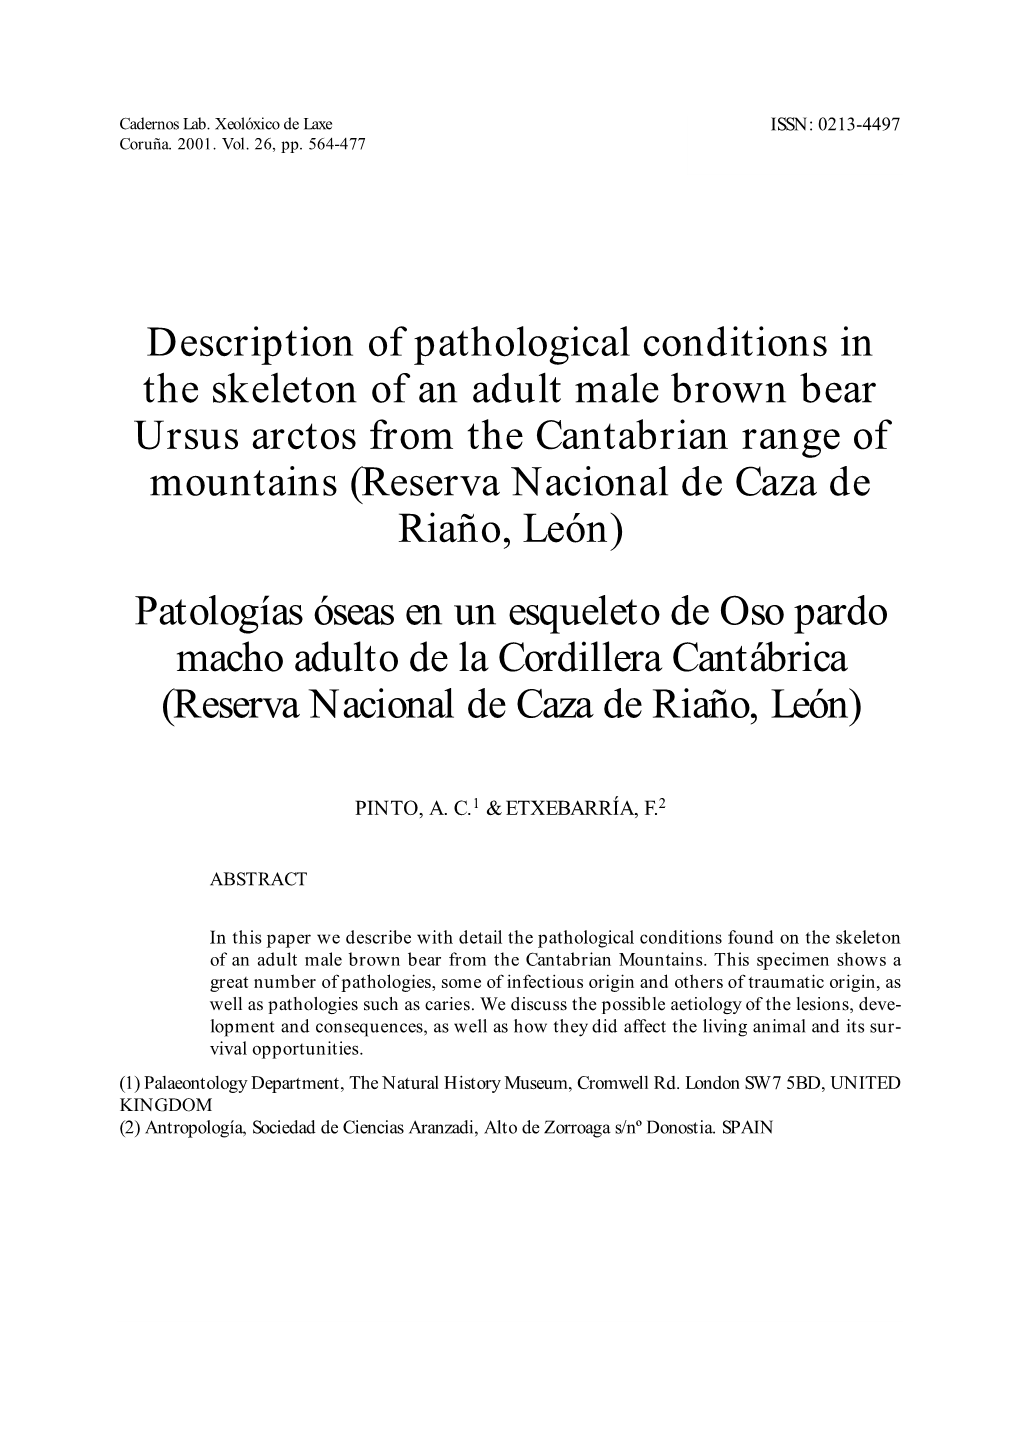 Description of Pathological Conditions in the Skeleton of an Adult Male Brown Bear Ursus Arctos from the Cantabrian Range Of